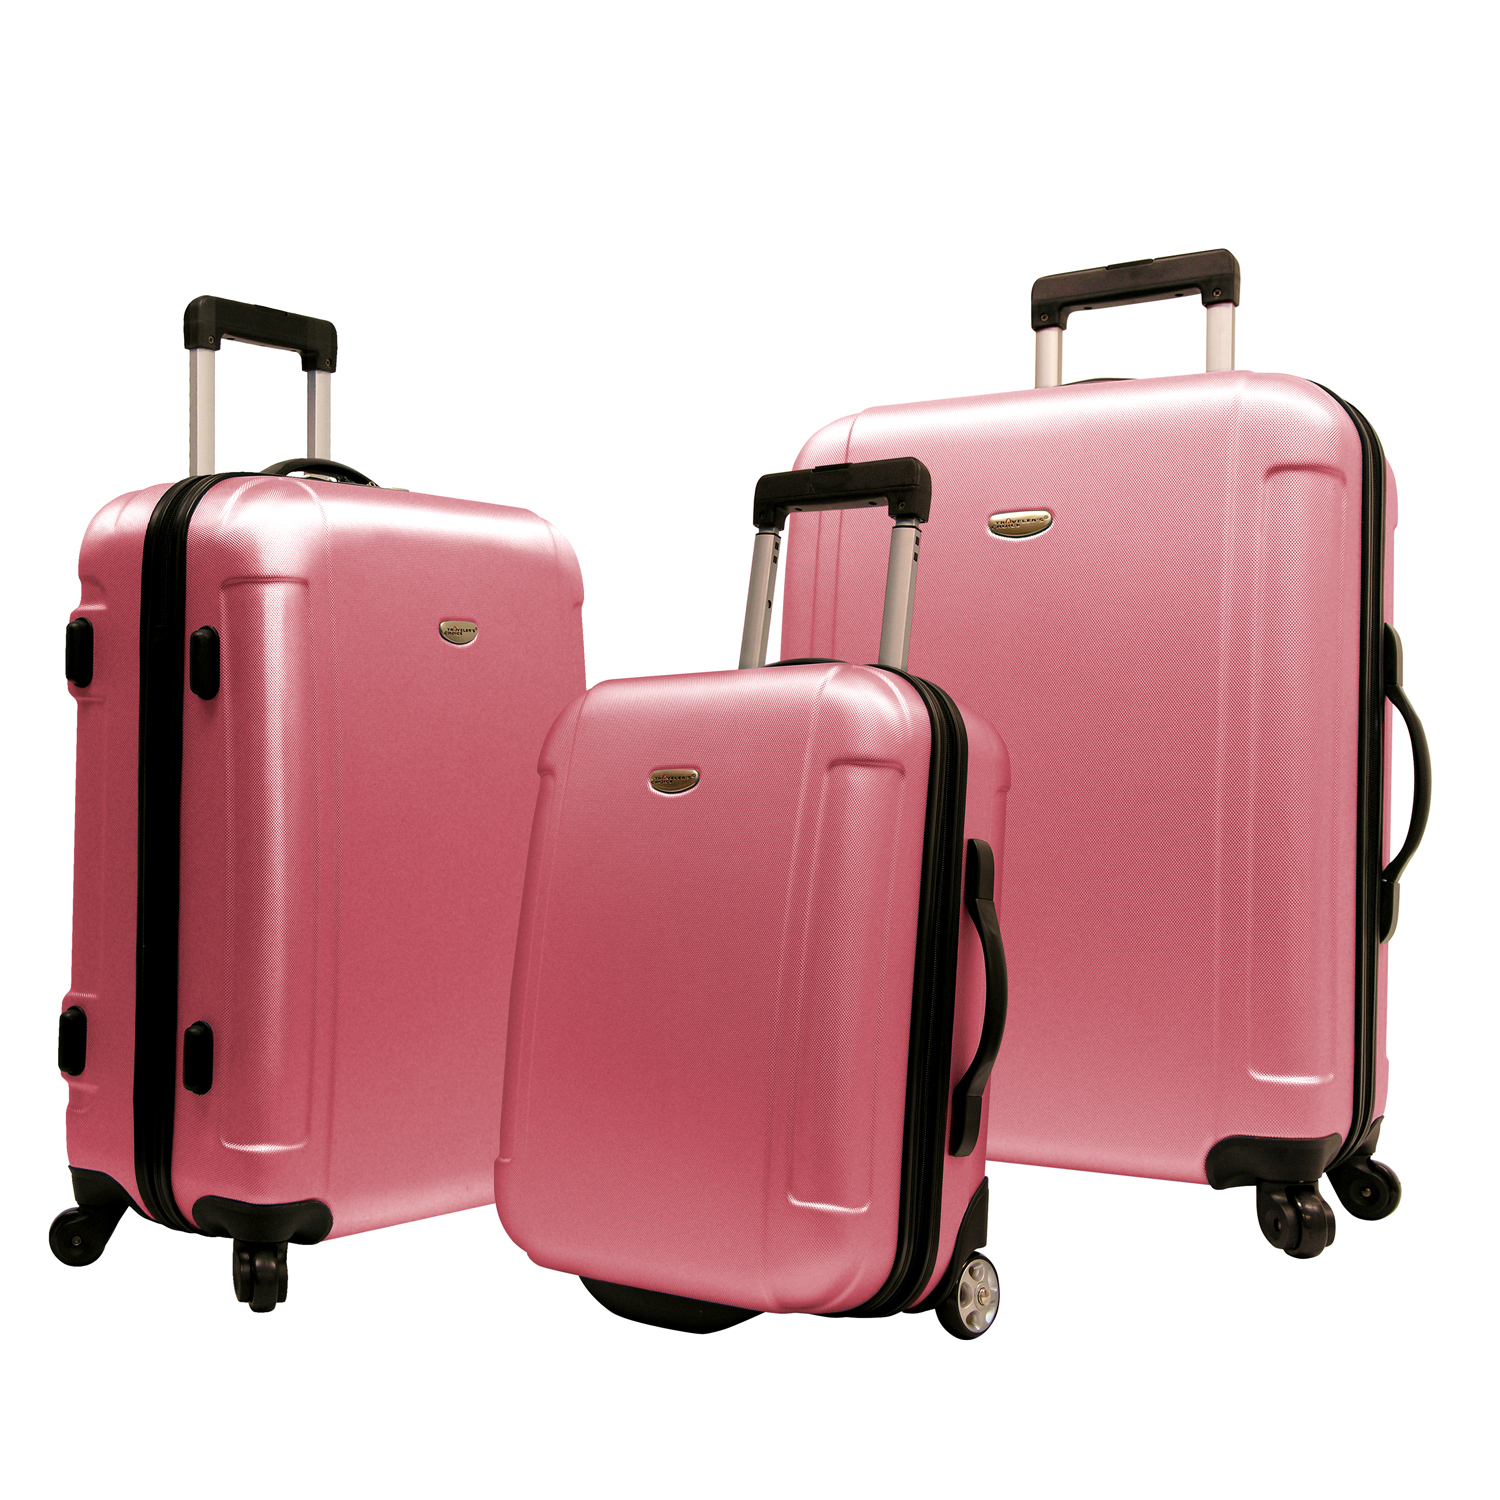 Traveler's Choice Freedom 3-Piece Ultra-Lightweight Hardside Spinners & Roller Luggage Set - 21" 25" 29" - image 4 of 10